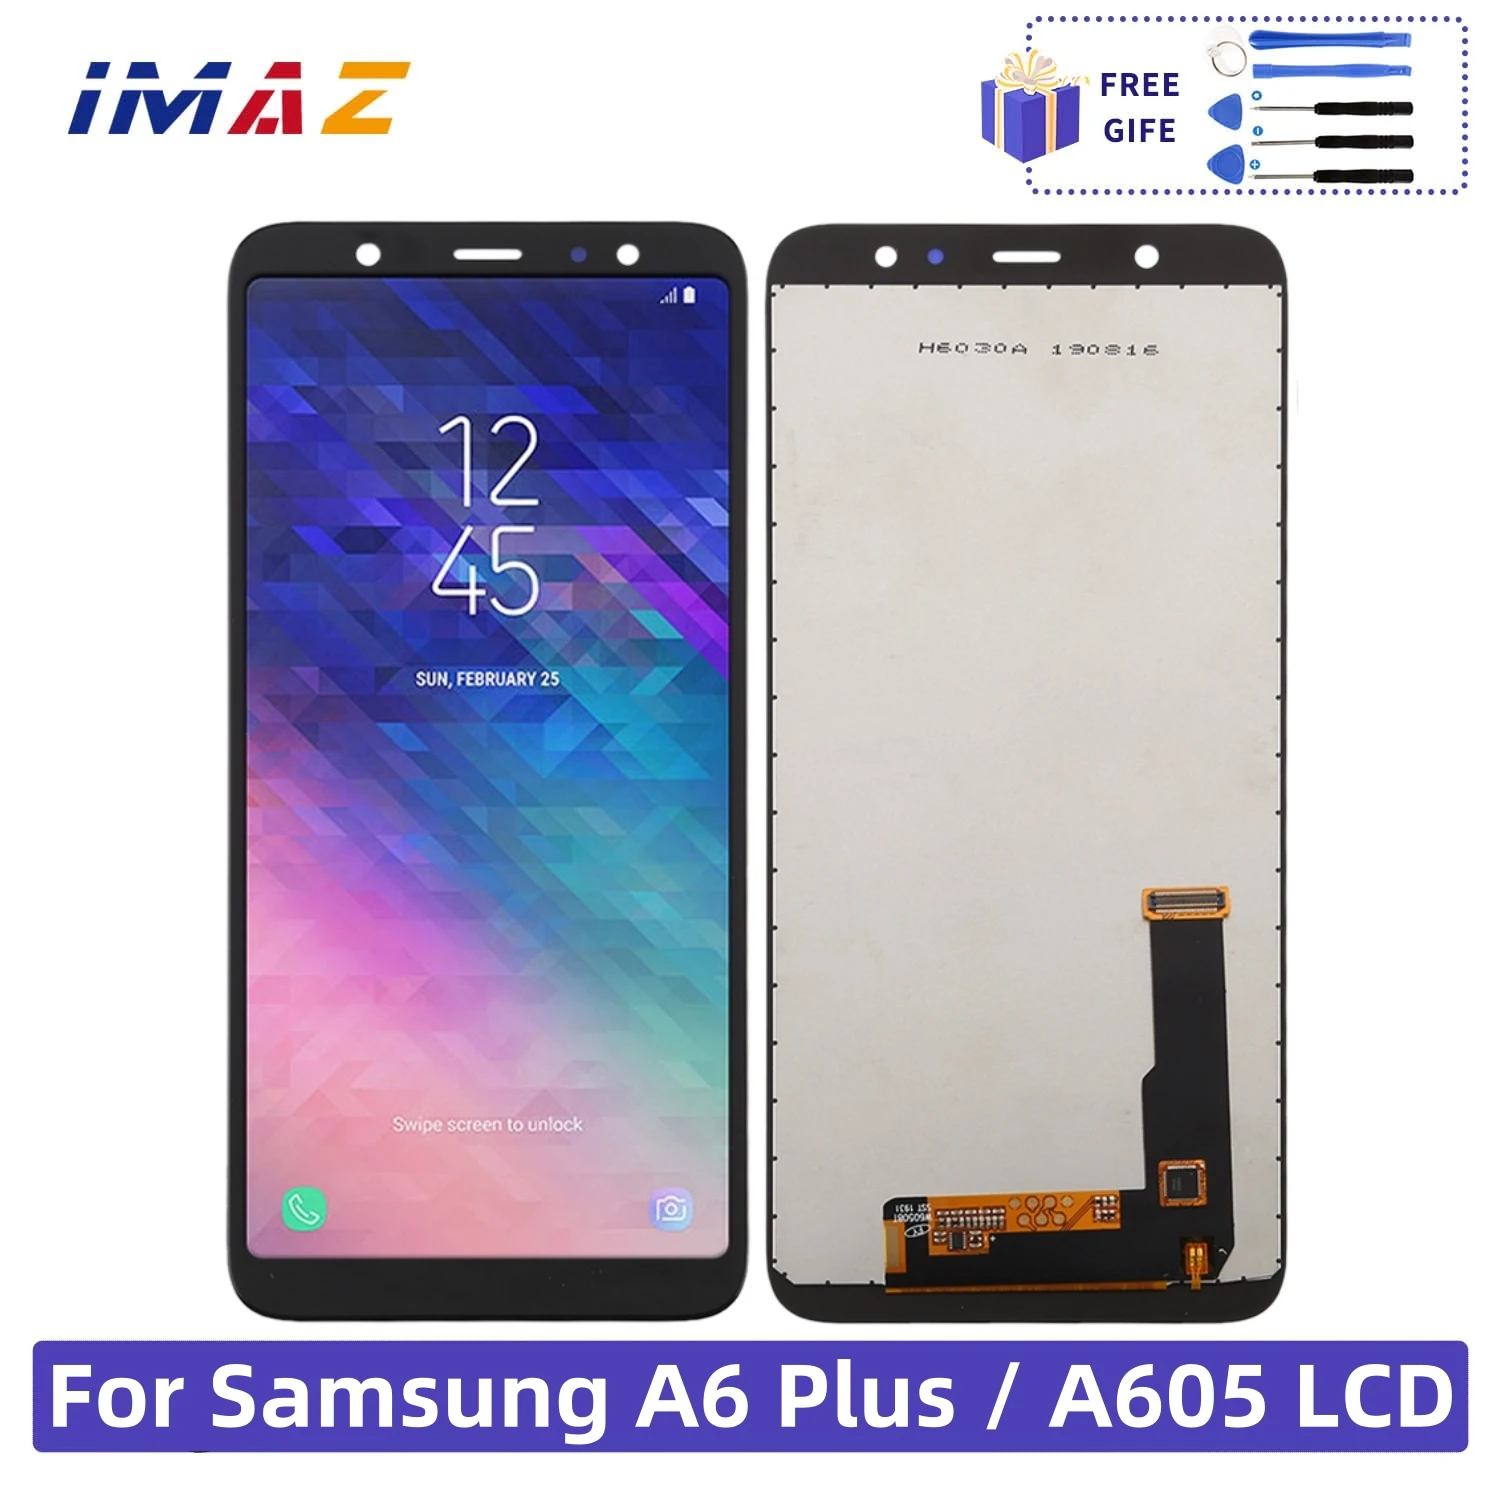 

For Samsung Galaxy A6 Plus 2018 A605 LCD Display Touch Screen Digitizer Assembly For Samsung A6 Plus A605 A605F A605FN A605G LCD